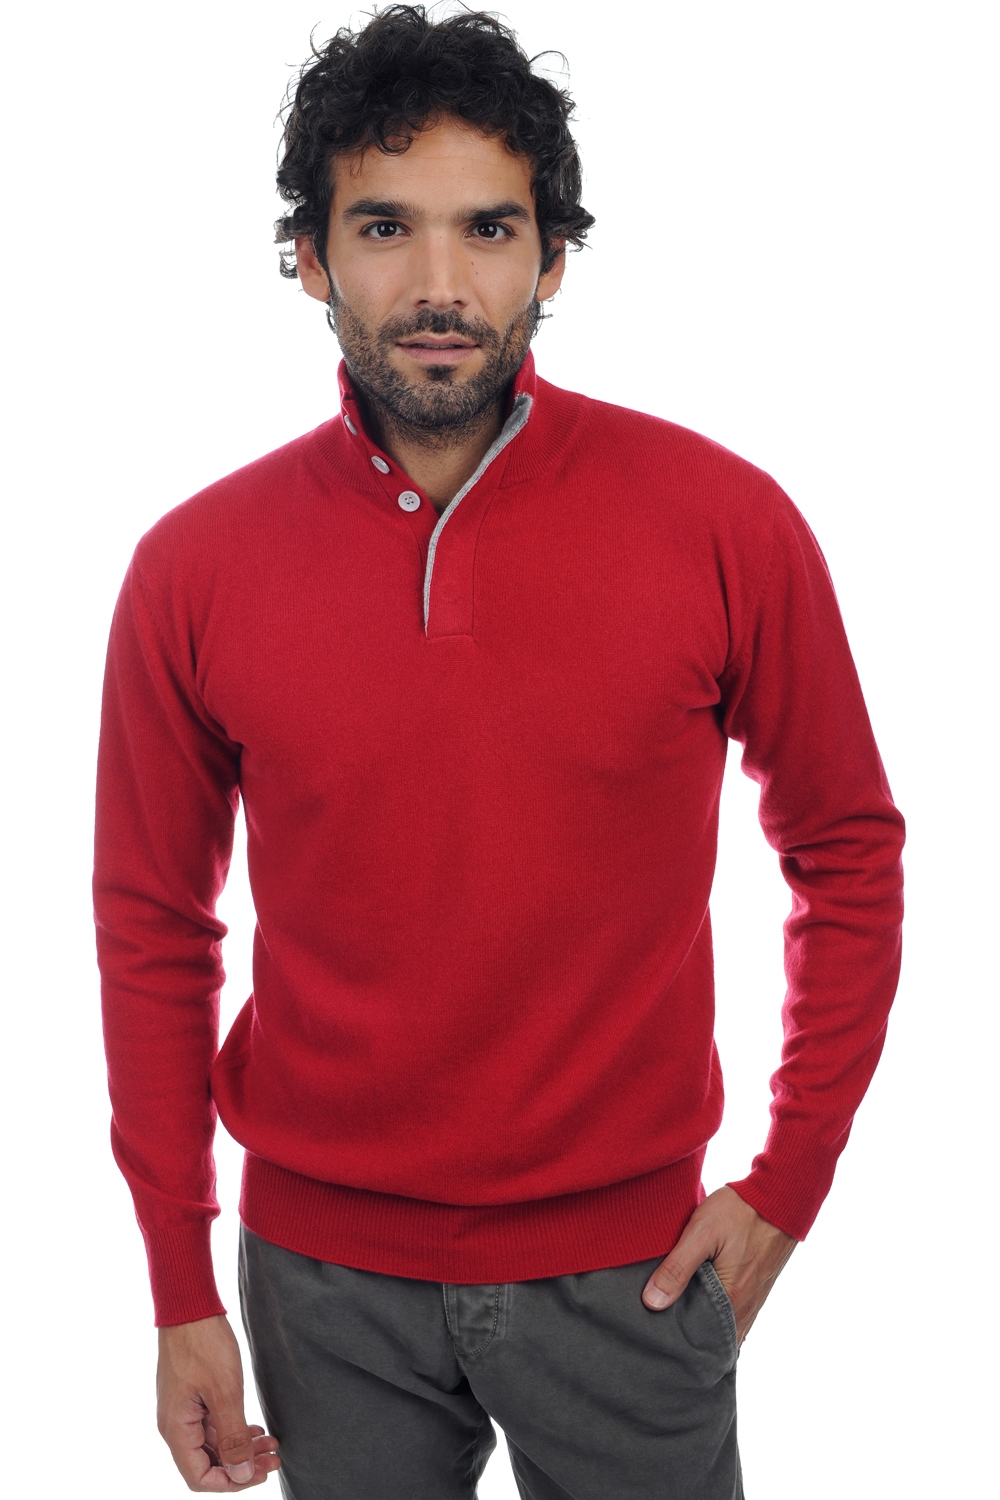 Cachemire pull homme gauvain rouge velours flanelle chine 3xl